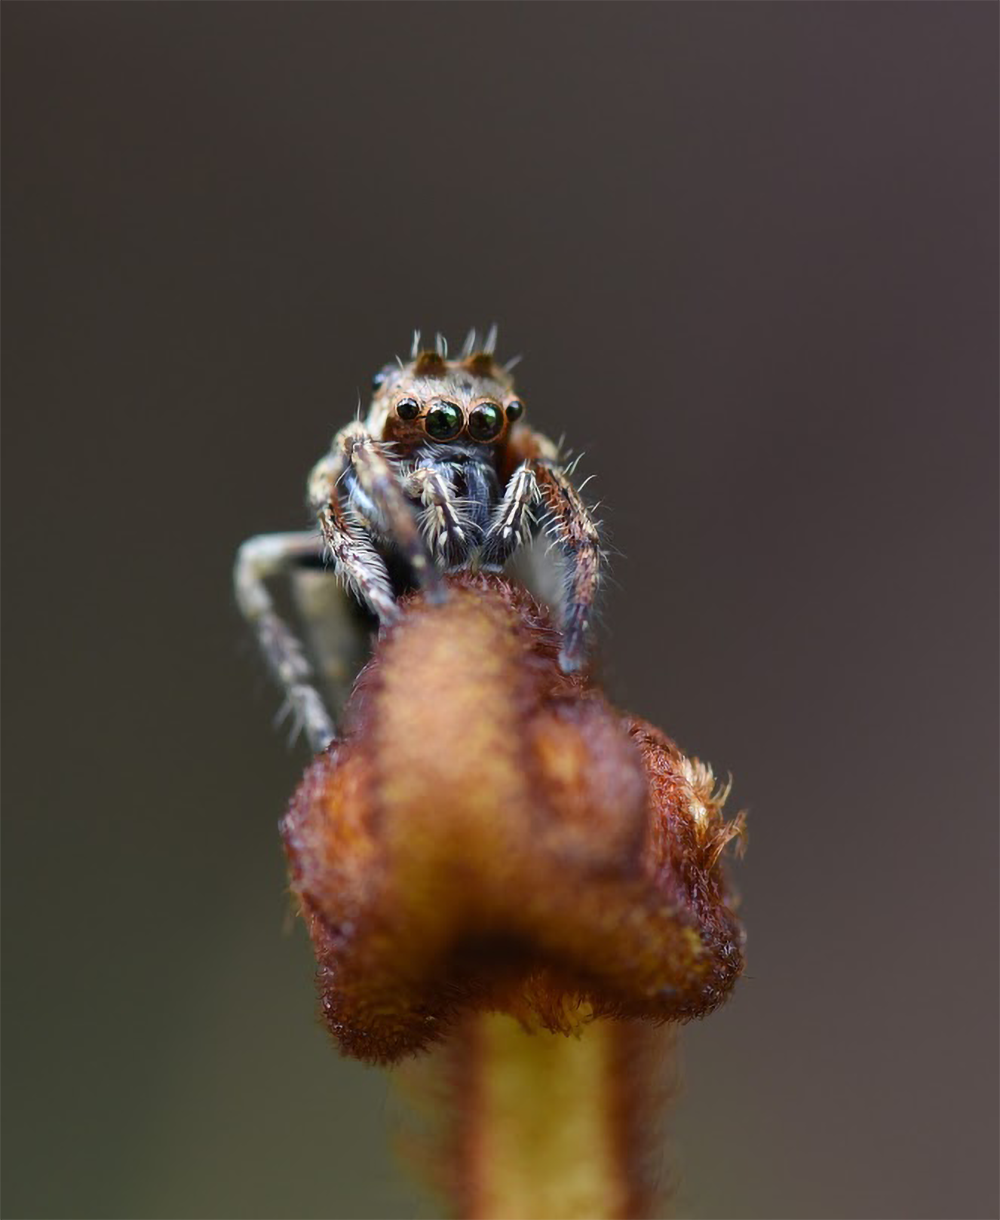 Close-up photo of spider on a budded leaf